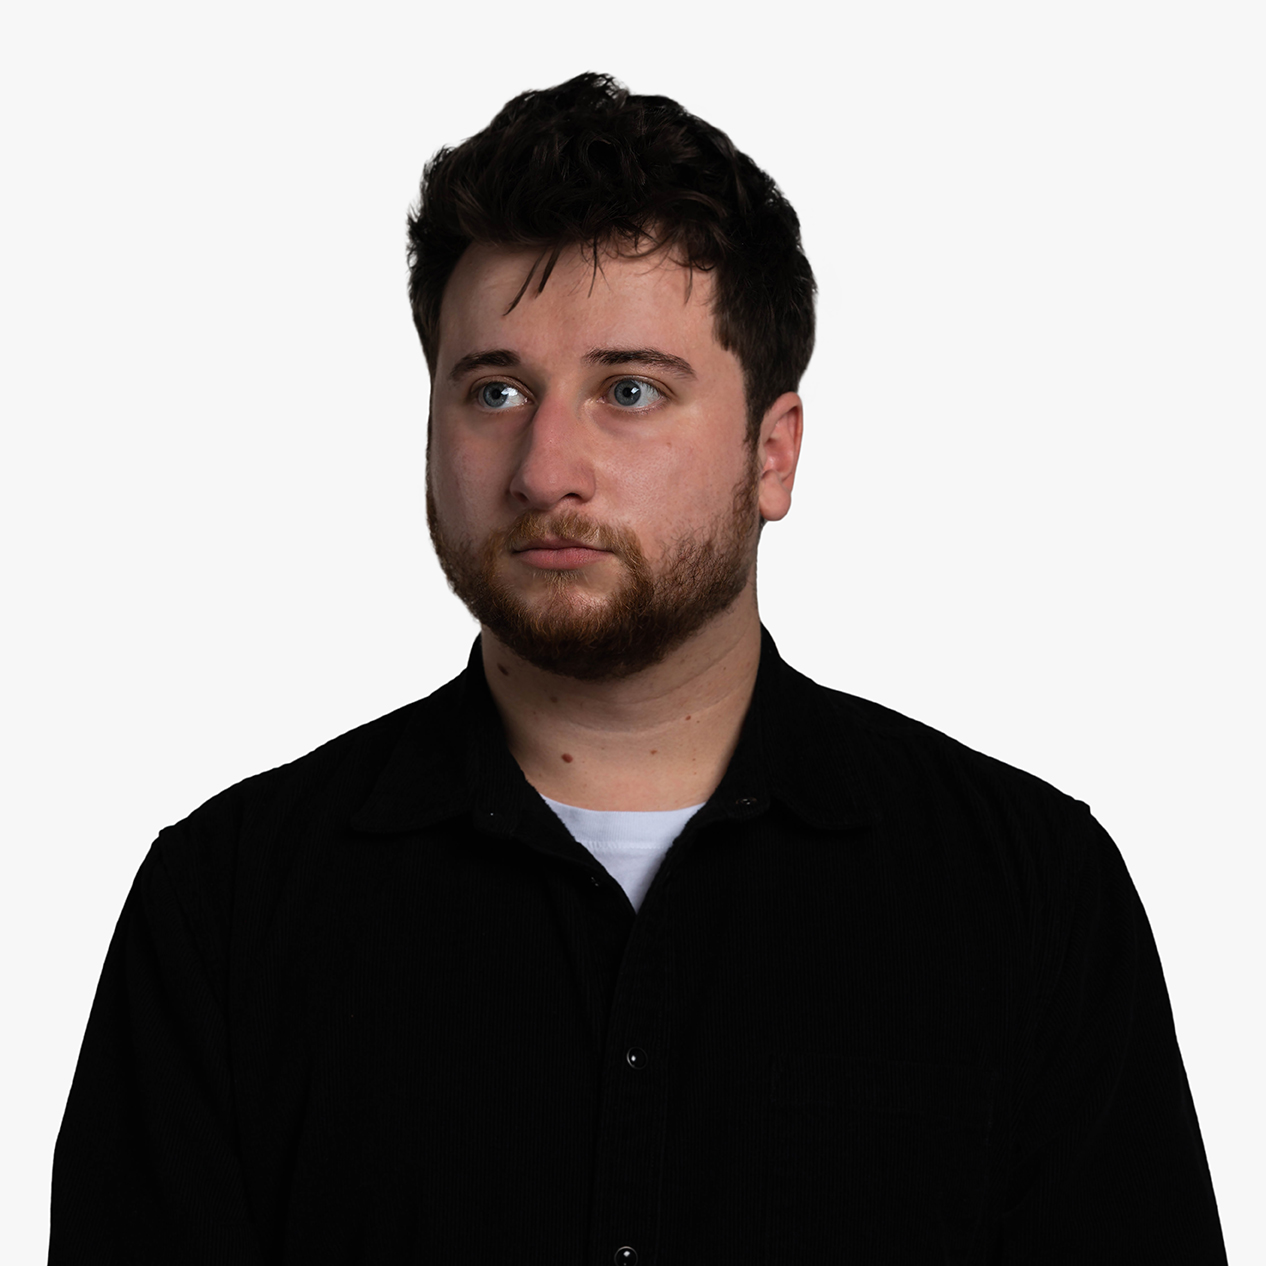 Bret Caples, a white man with messy brown hair wearing a black corduroy shirt. The photo is not the best representation of him and he looks uncomfortable.